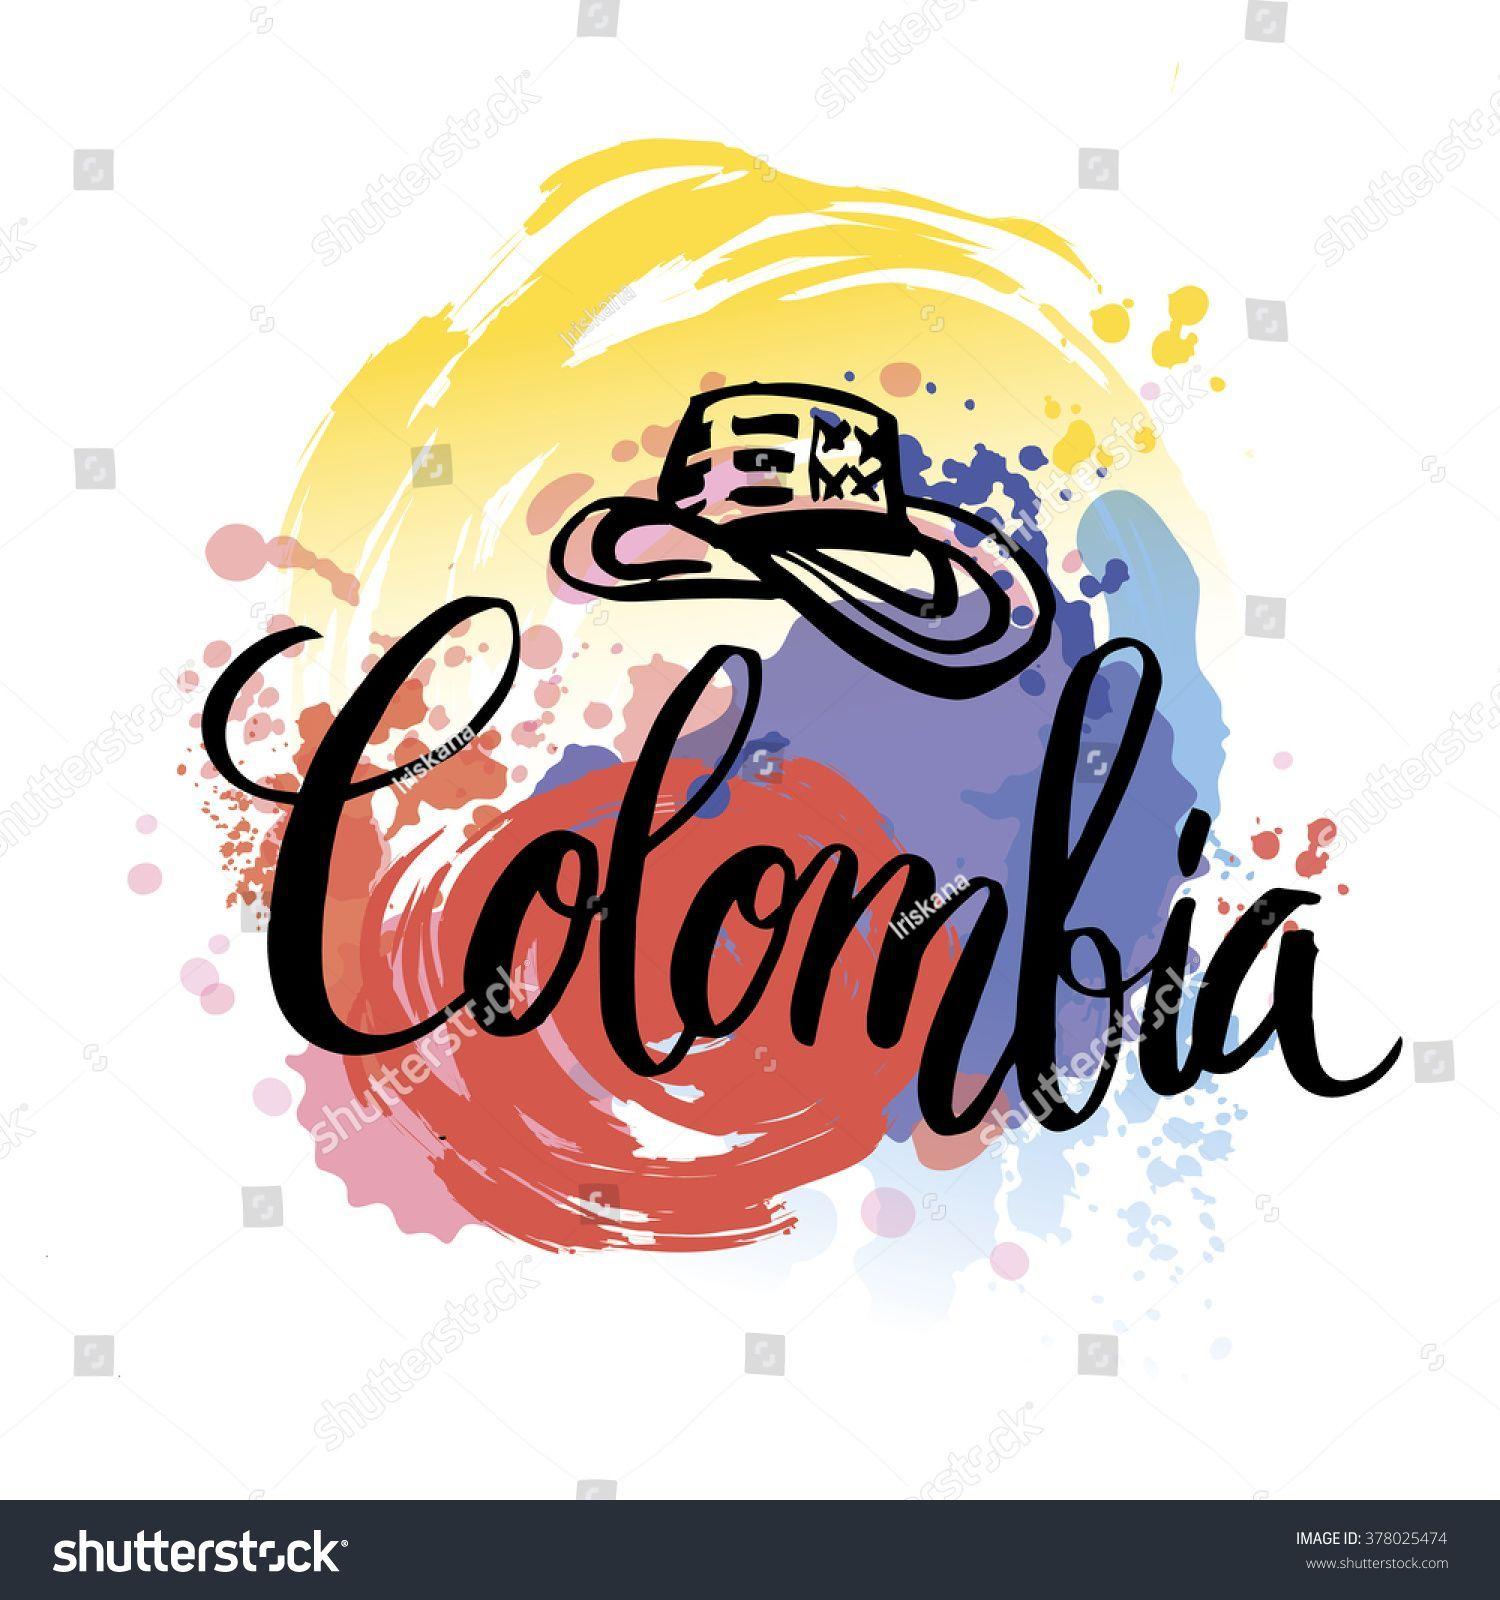 Colombia Logo - Hand lettering logo with watercolor elements. Vector illustration